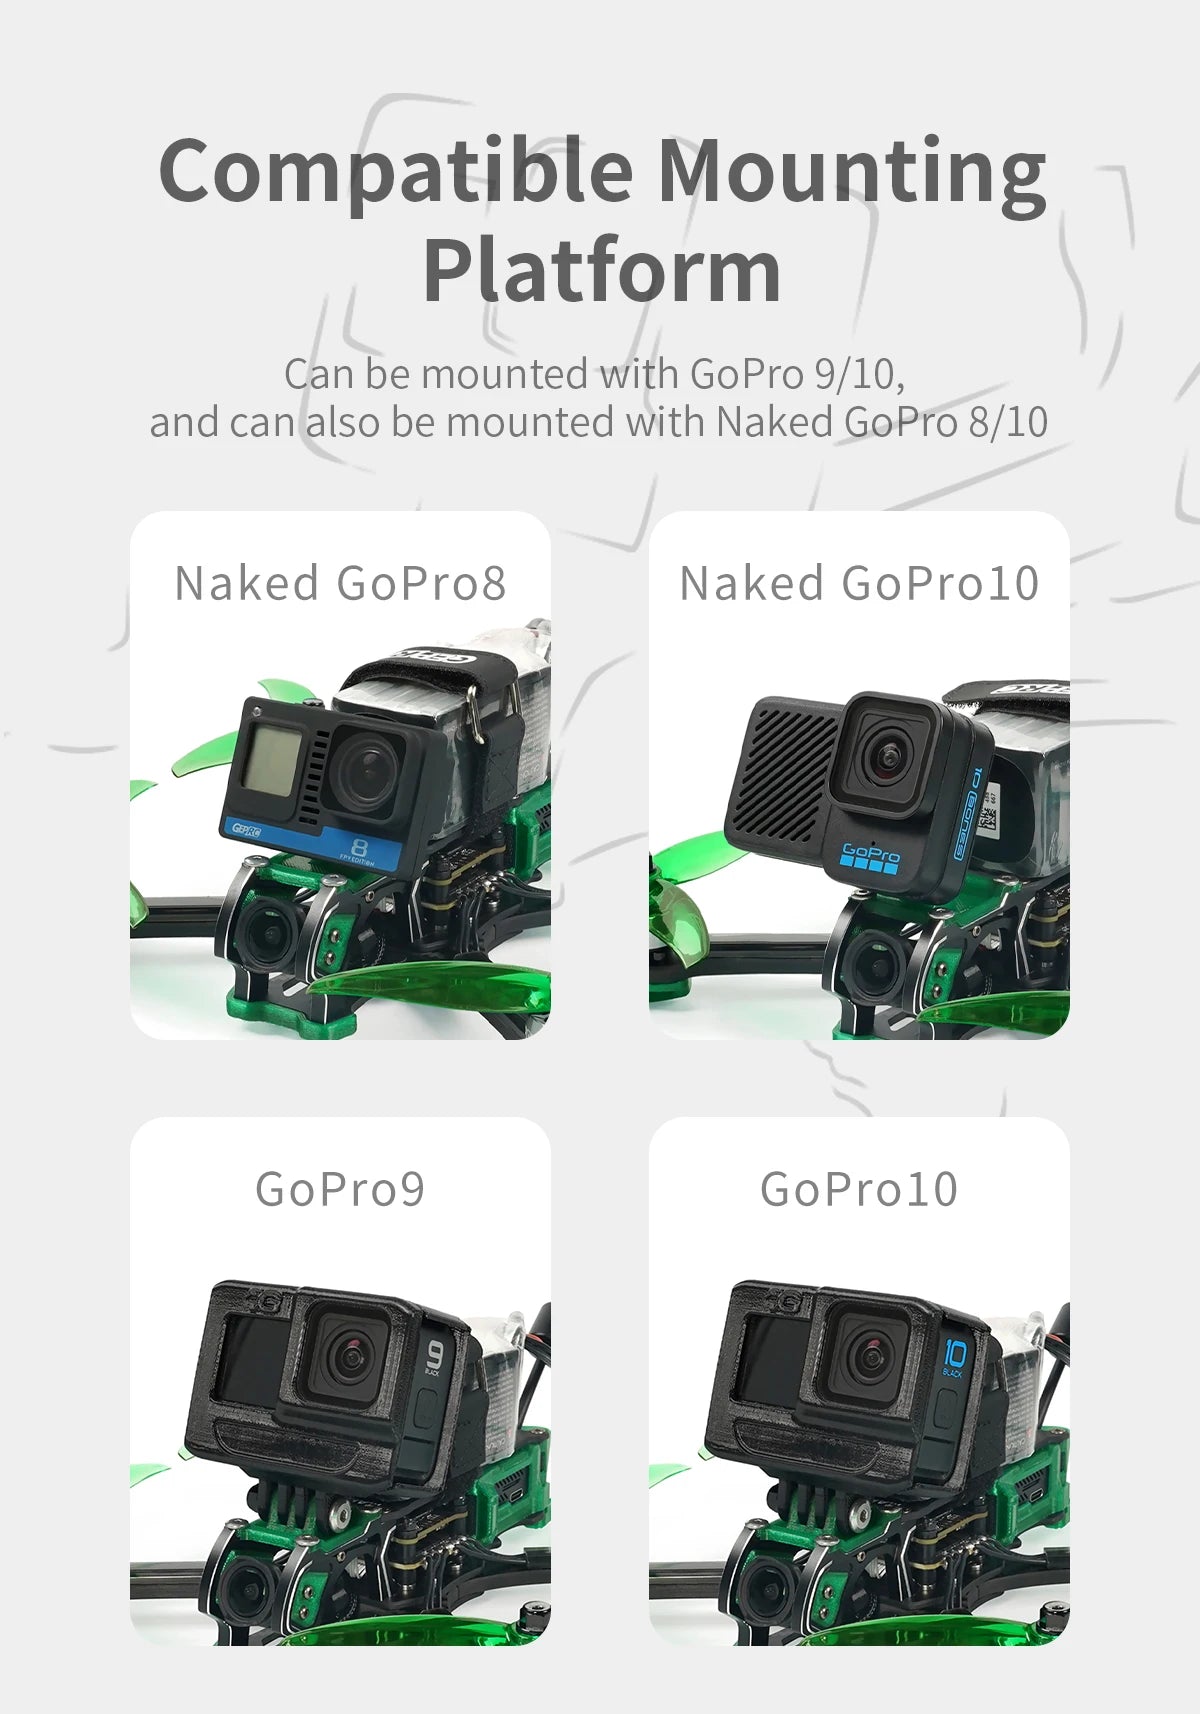 GEPRC New MARK5 HD O3 Freestyle FPV Drone, Compatible Mounting Platform Can be mounted with Naked GoPro 9/10, and can also be